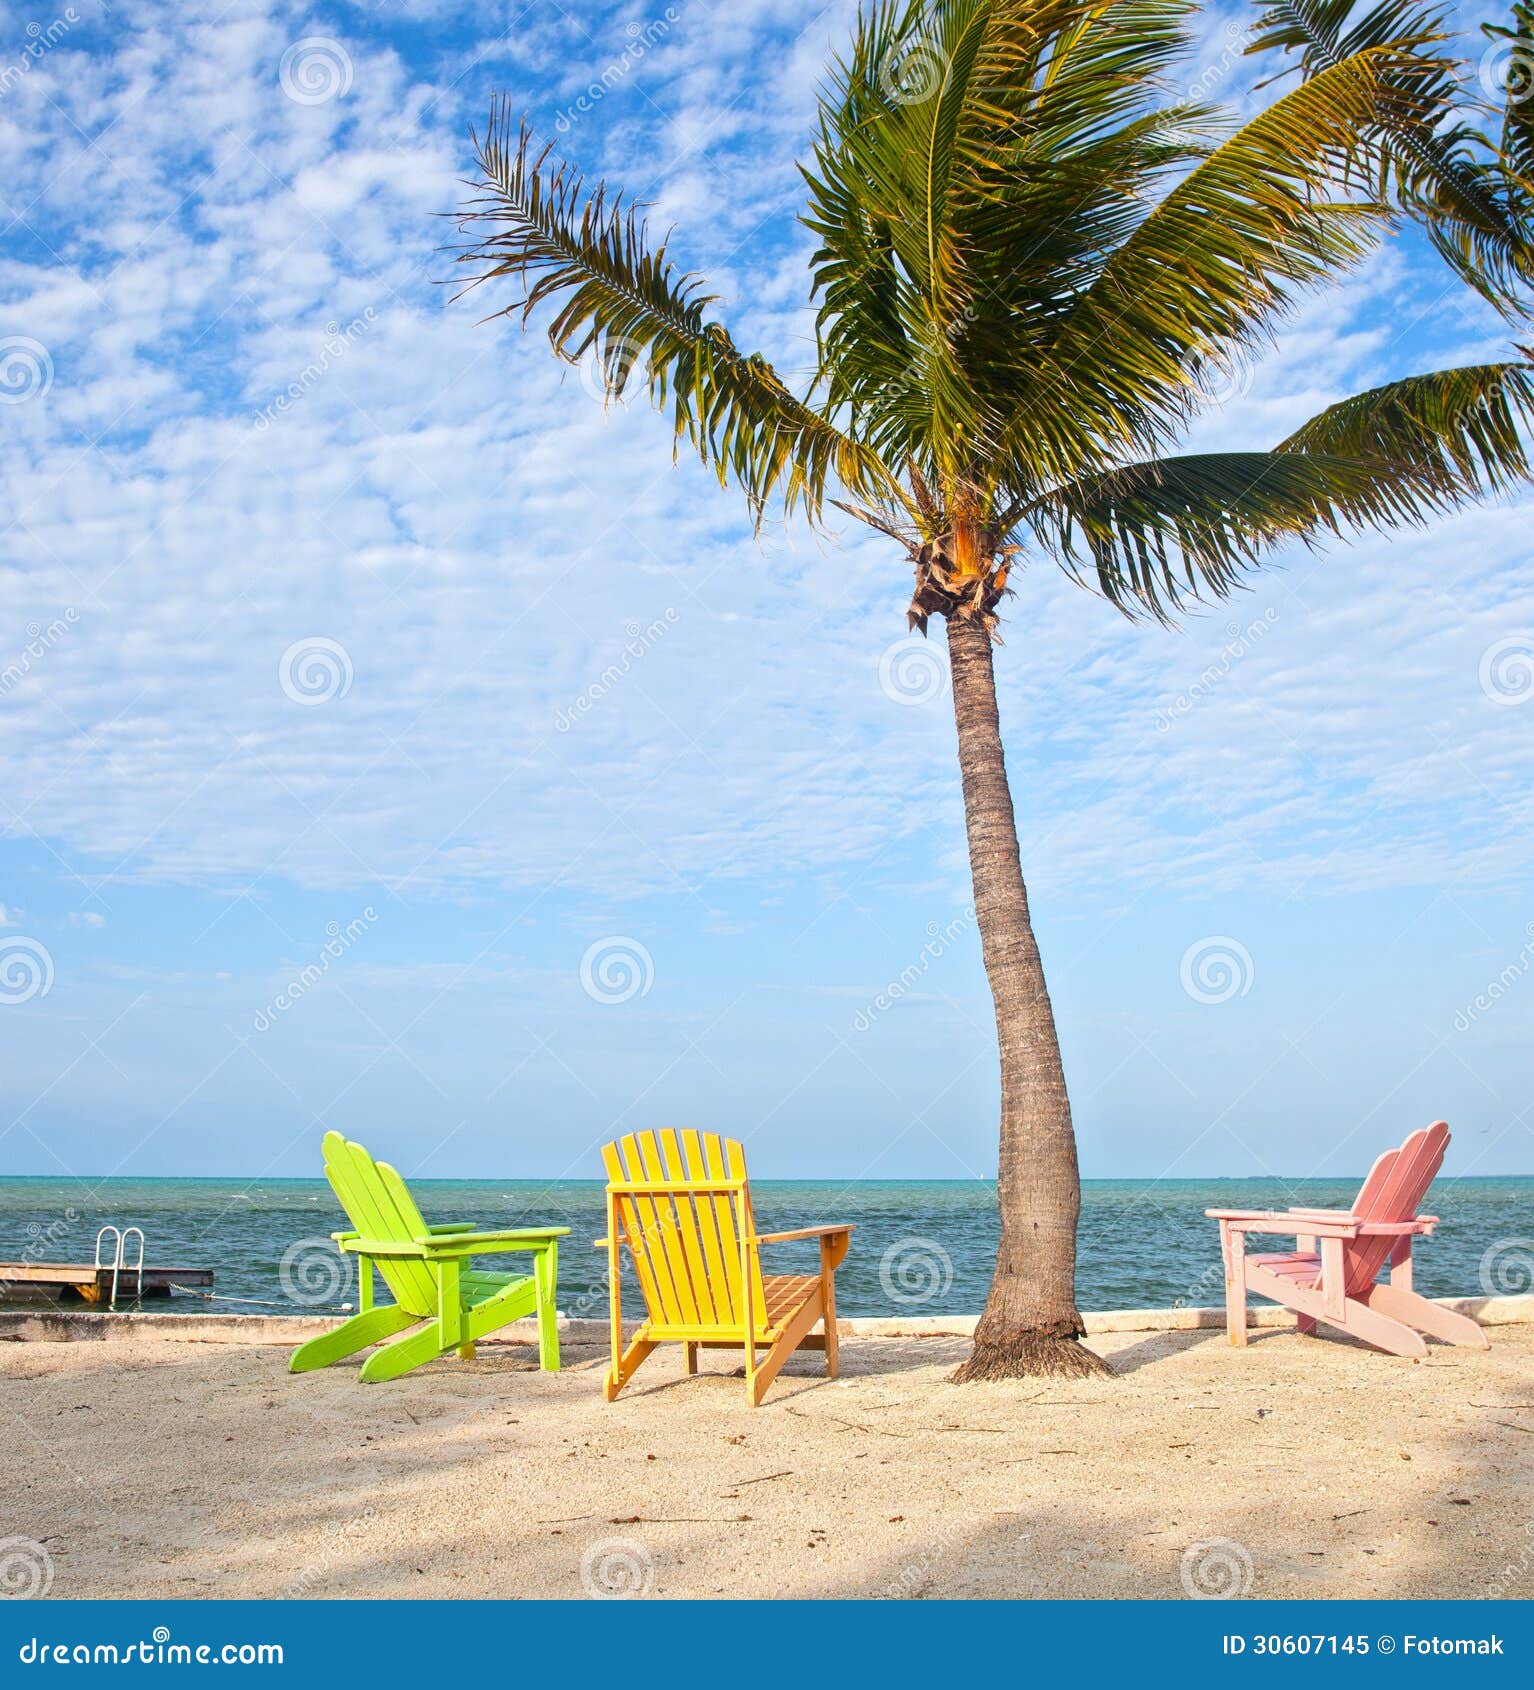 Beach With Palm Trees And Chairs